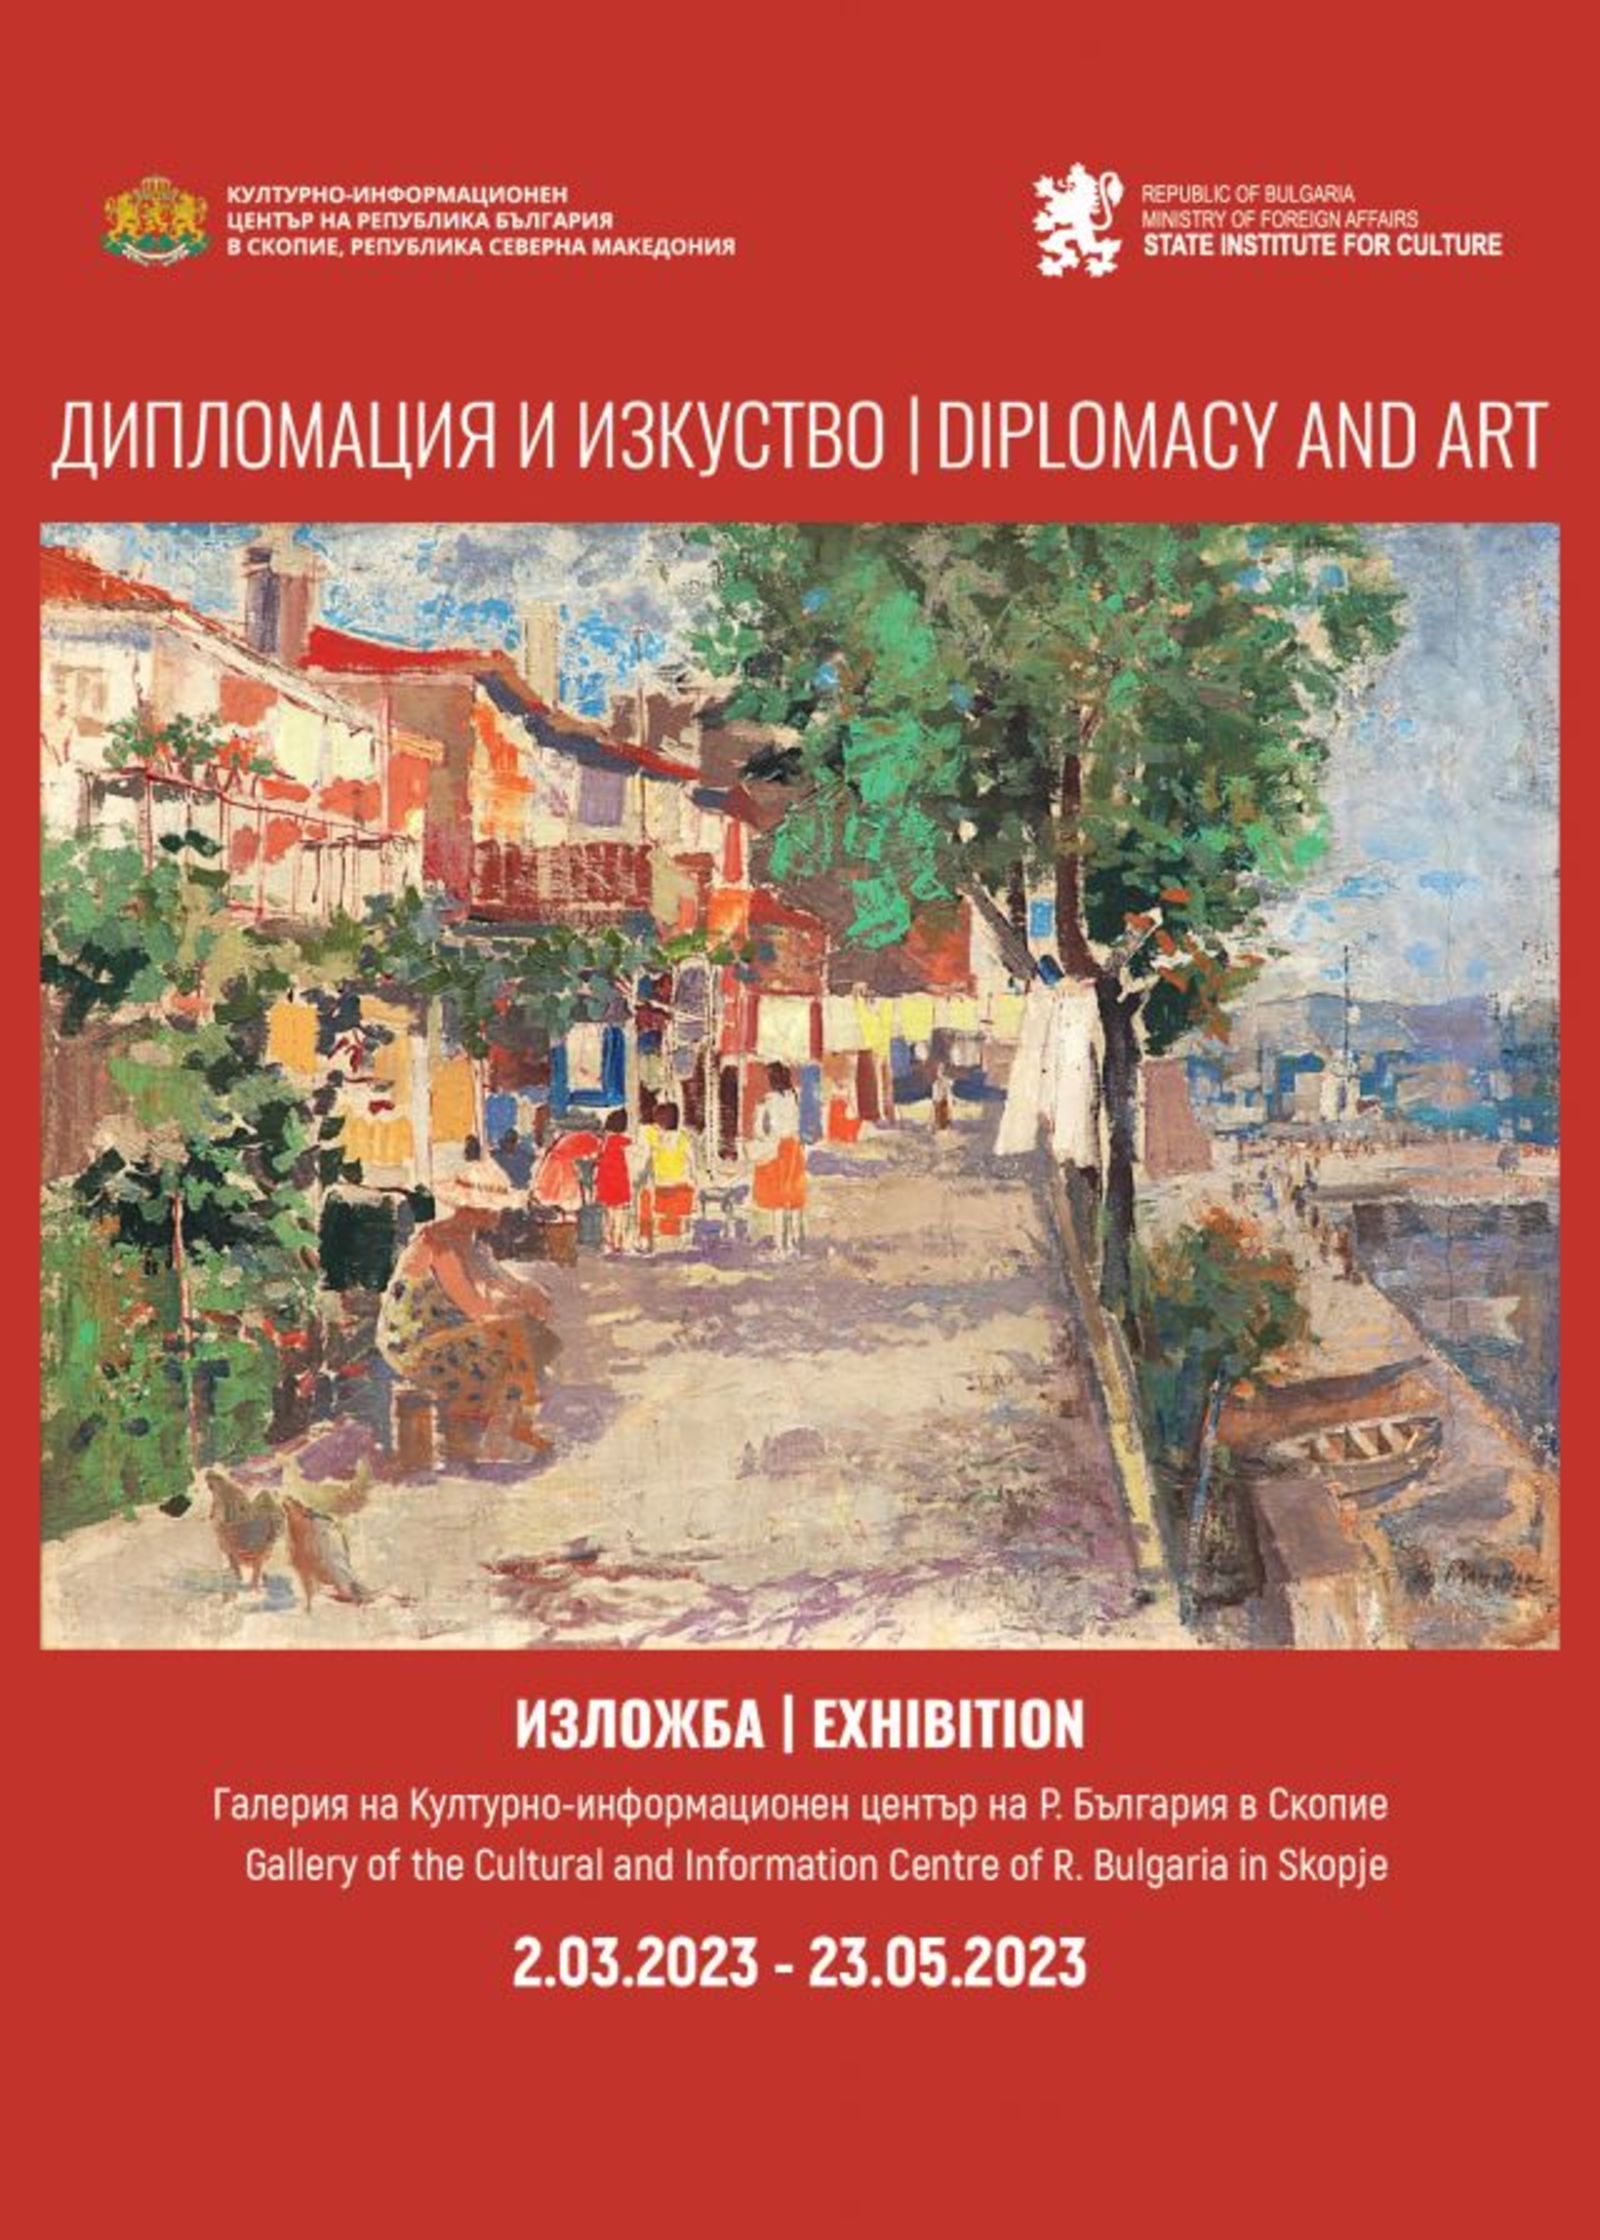 THE REPRESENTATIVE EXHIBITION "DIPLOMACY AND ART" IS GUESTING ON MARCH 3 AT THE BULGARIAN CULTURAL AND INFORMATION CENTER IN SKOPJE